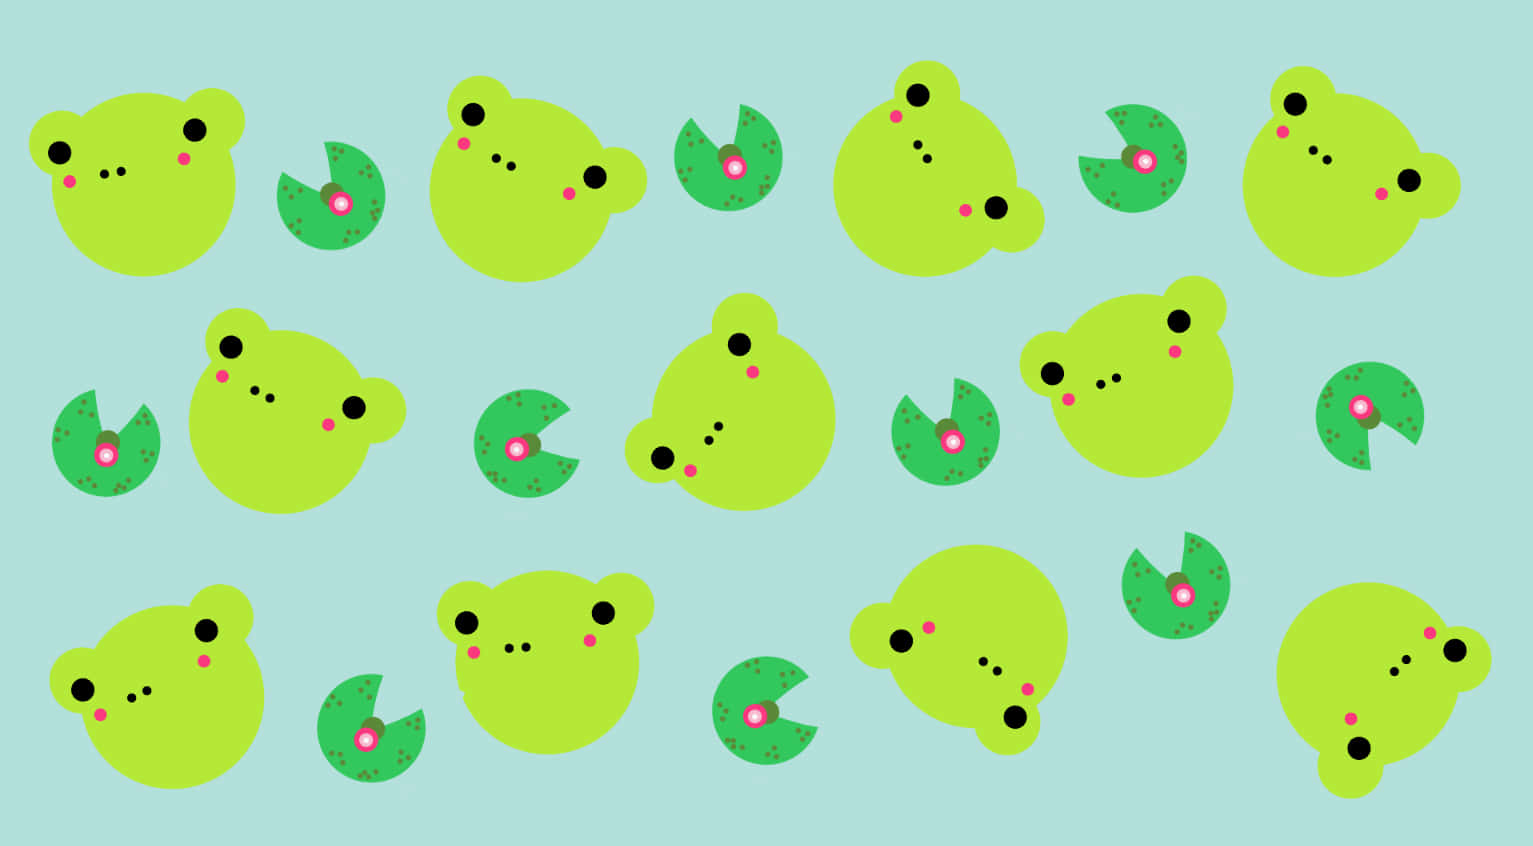 Download Feel the Kawaii vibes with this cute green character ...